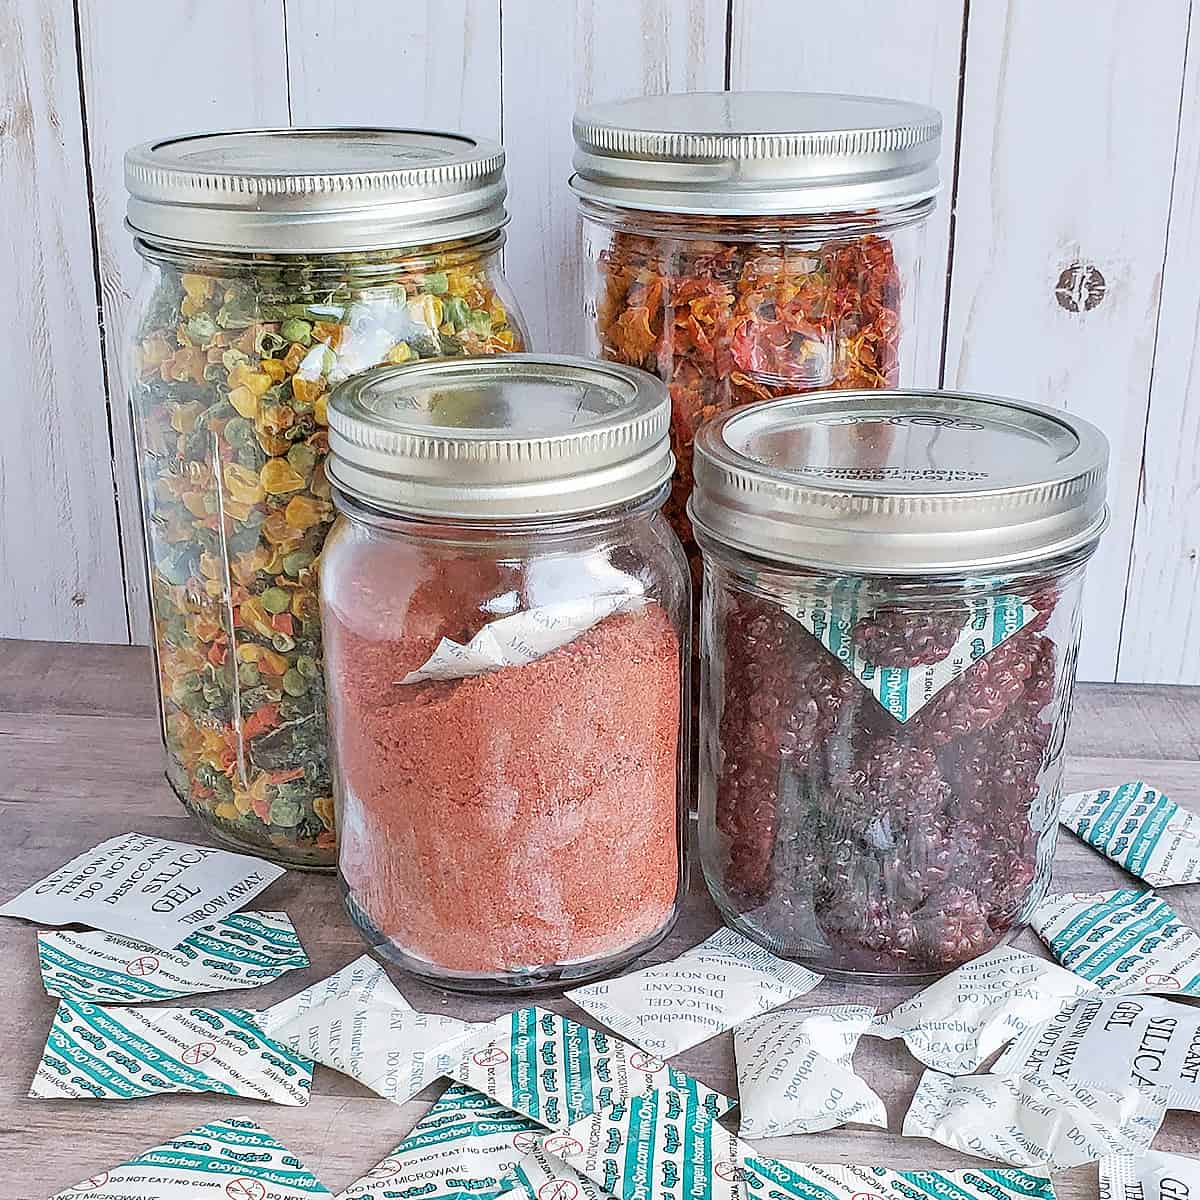 How to Store Dehydrated Foods